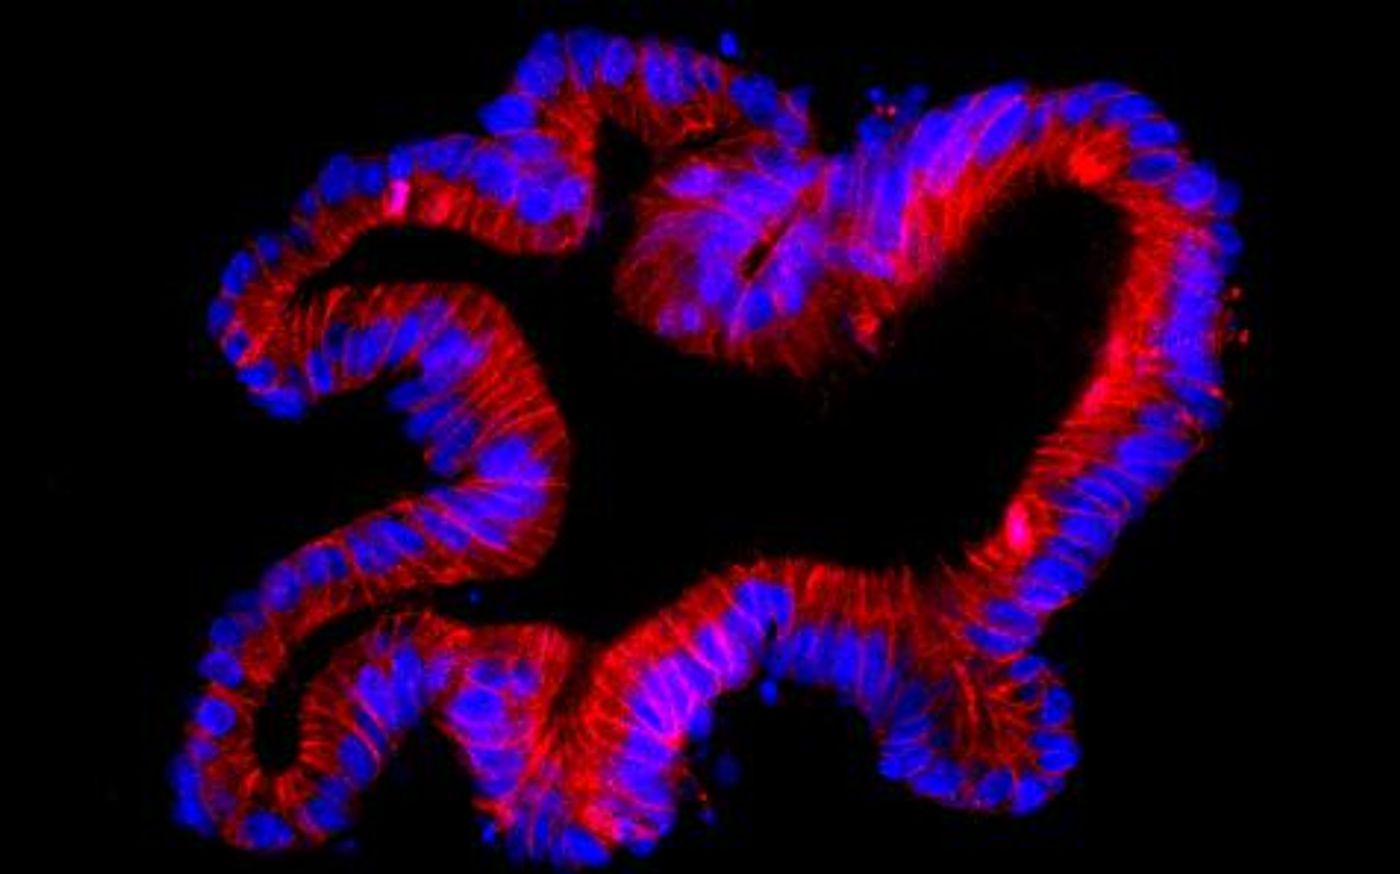 Fuorescent pictures of a human colon organoid stained for E-cadherin in red and DAPI in blue. / Credit: Dr Thierry Jarde